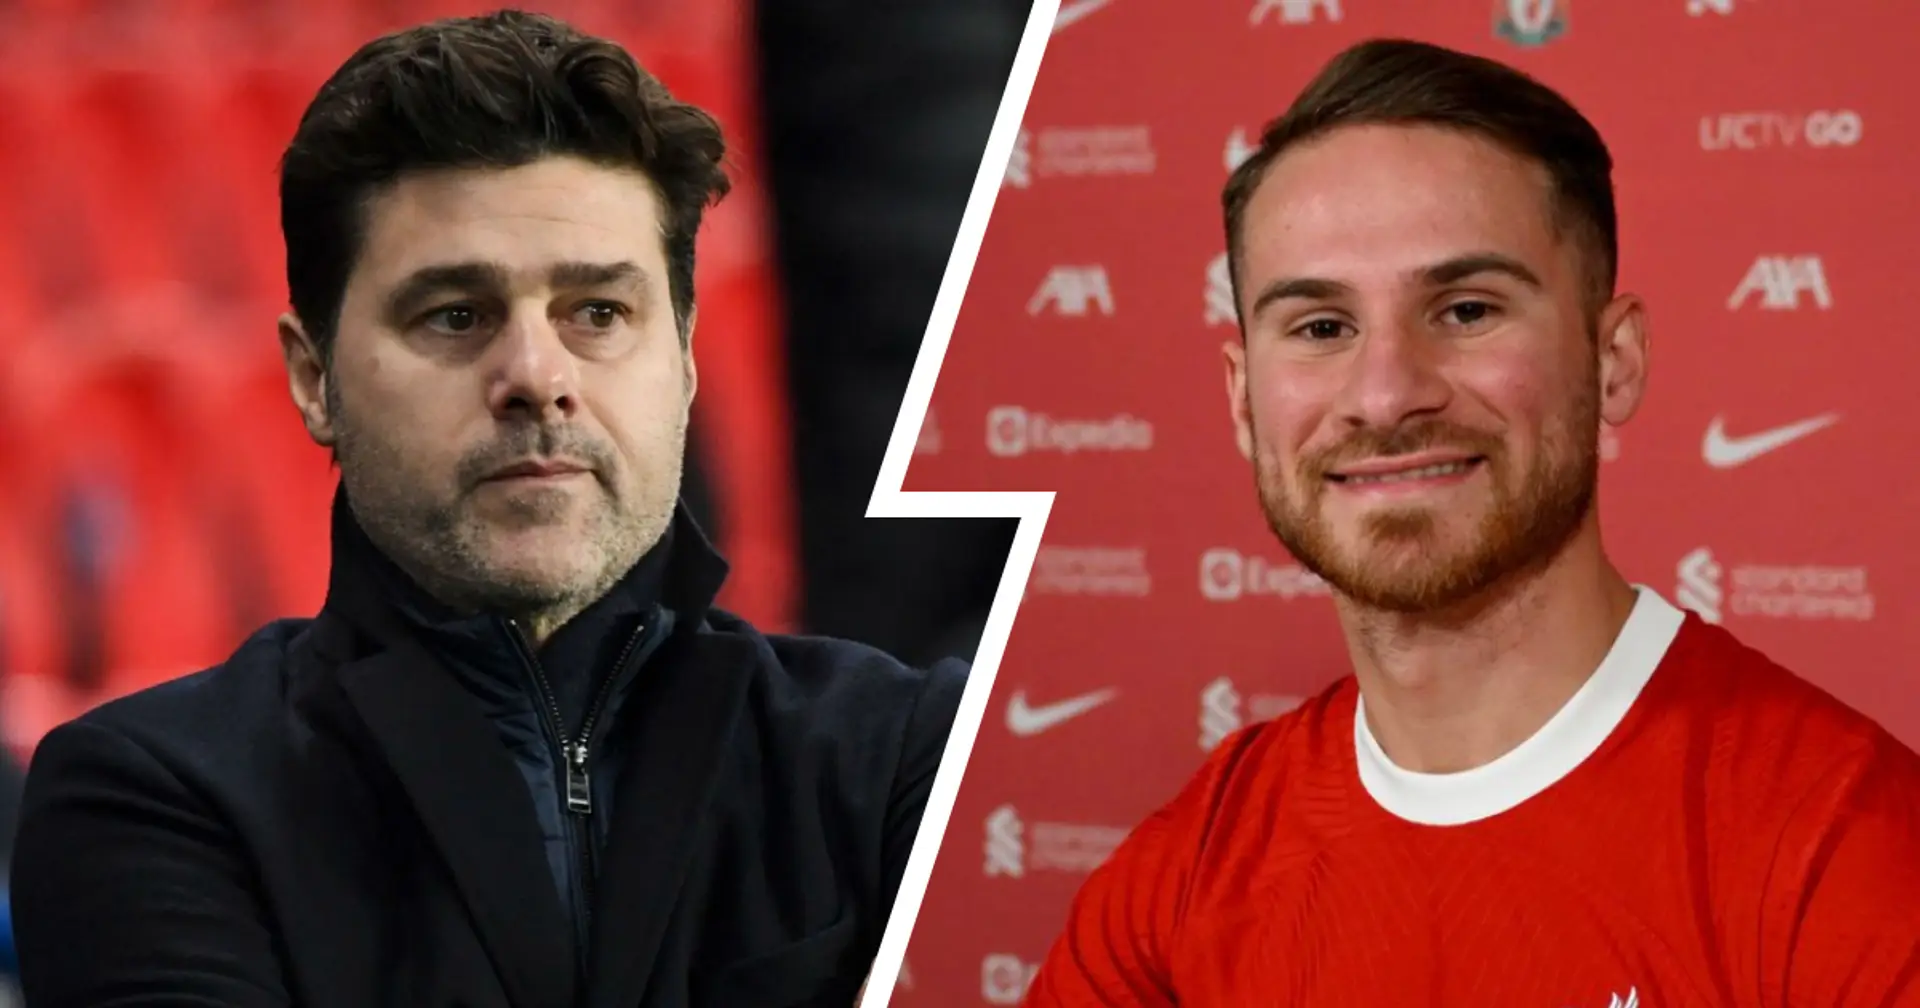 Pochettino tried late push for Mac Allister before Liverpool sealed transfer (reliability: 5 stars)